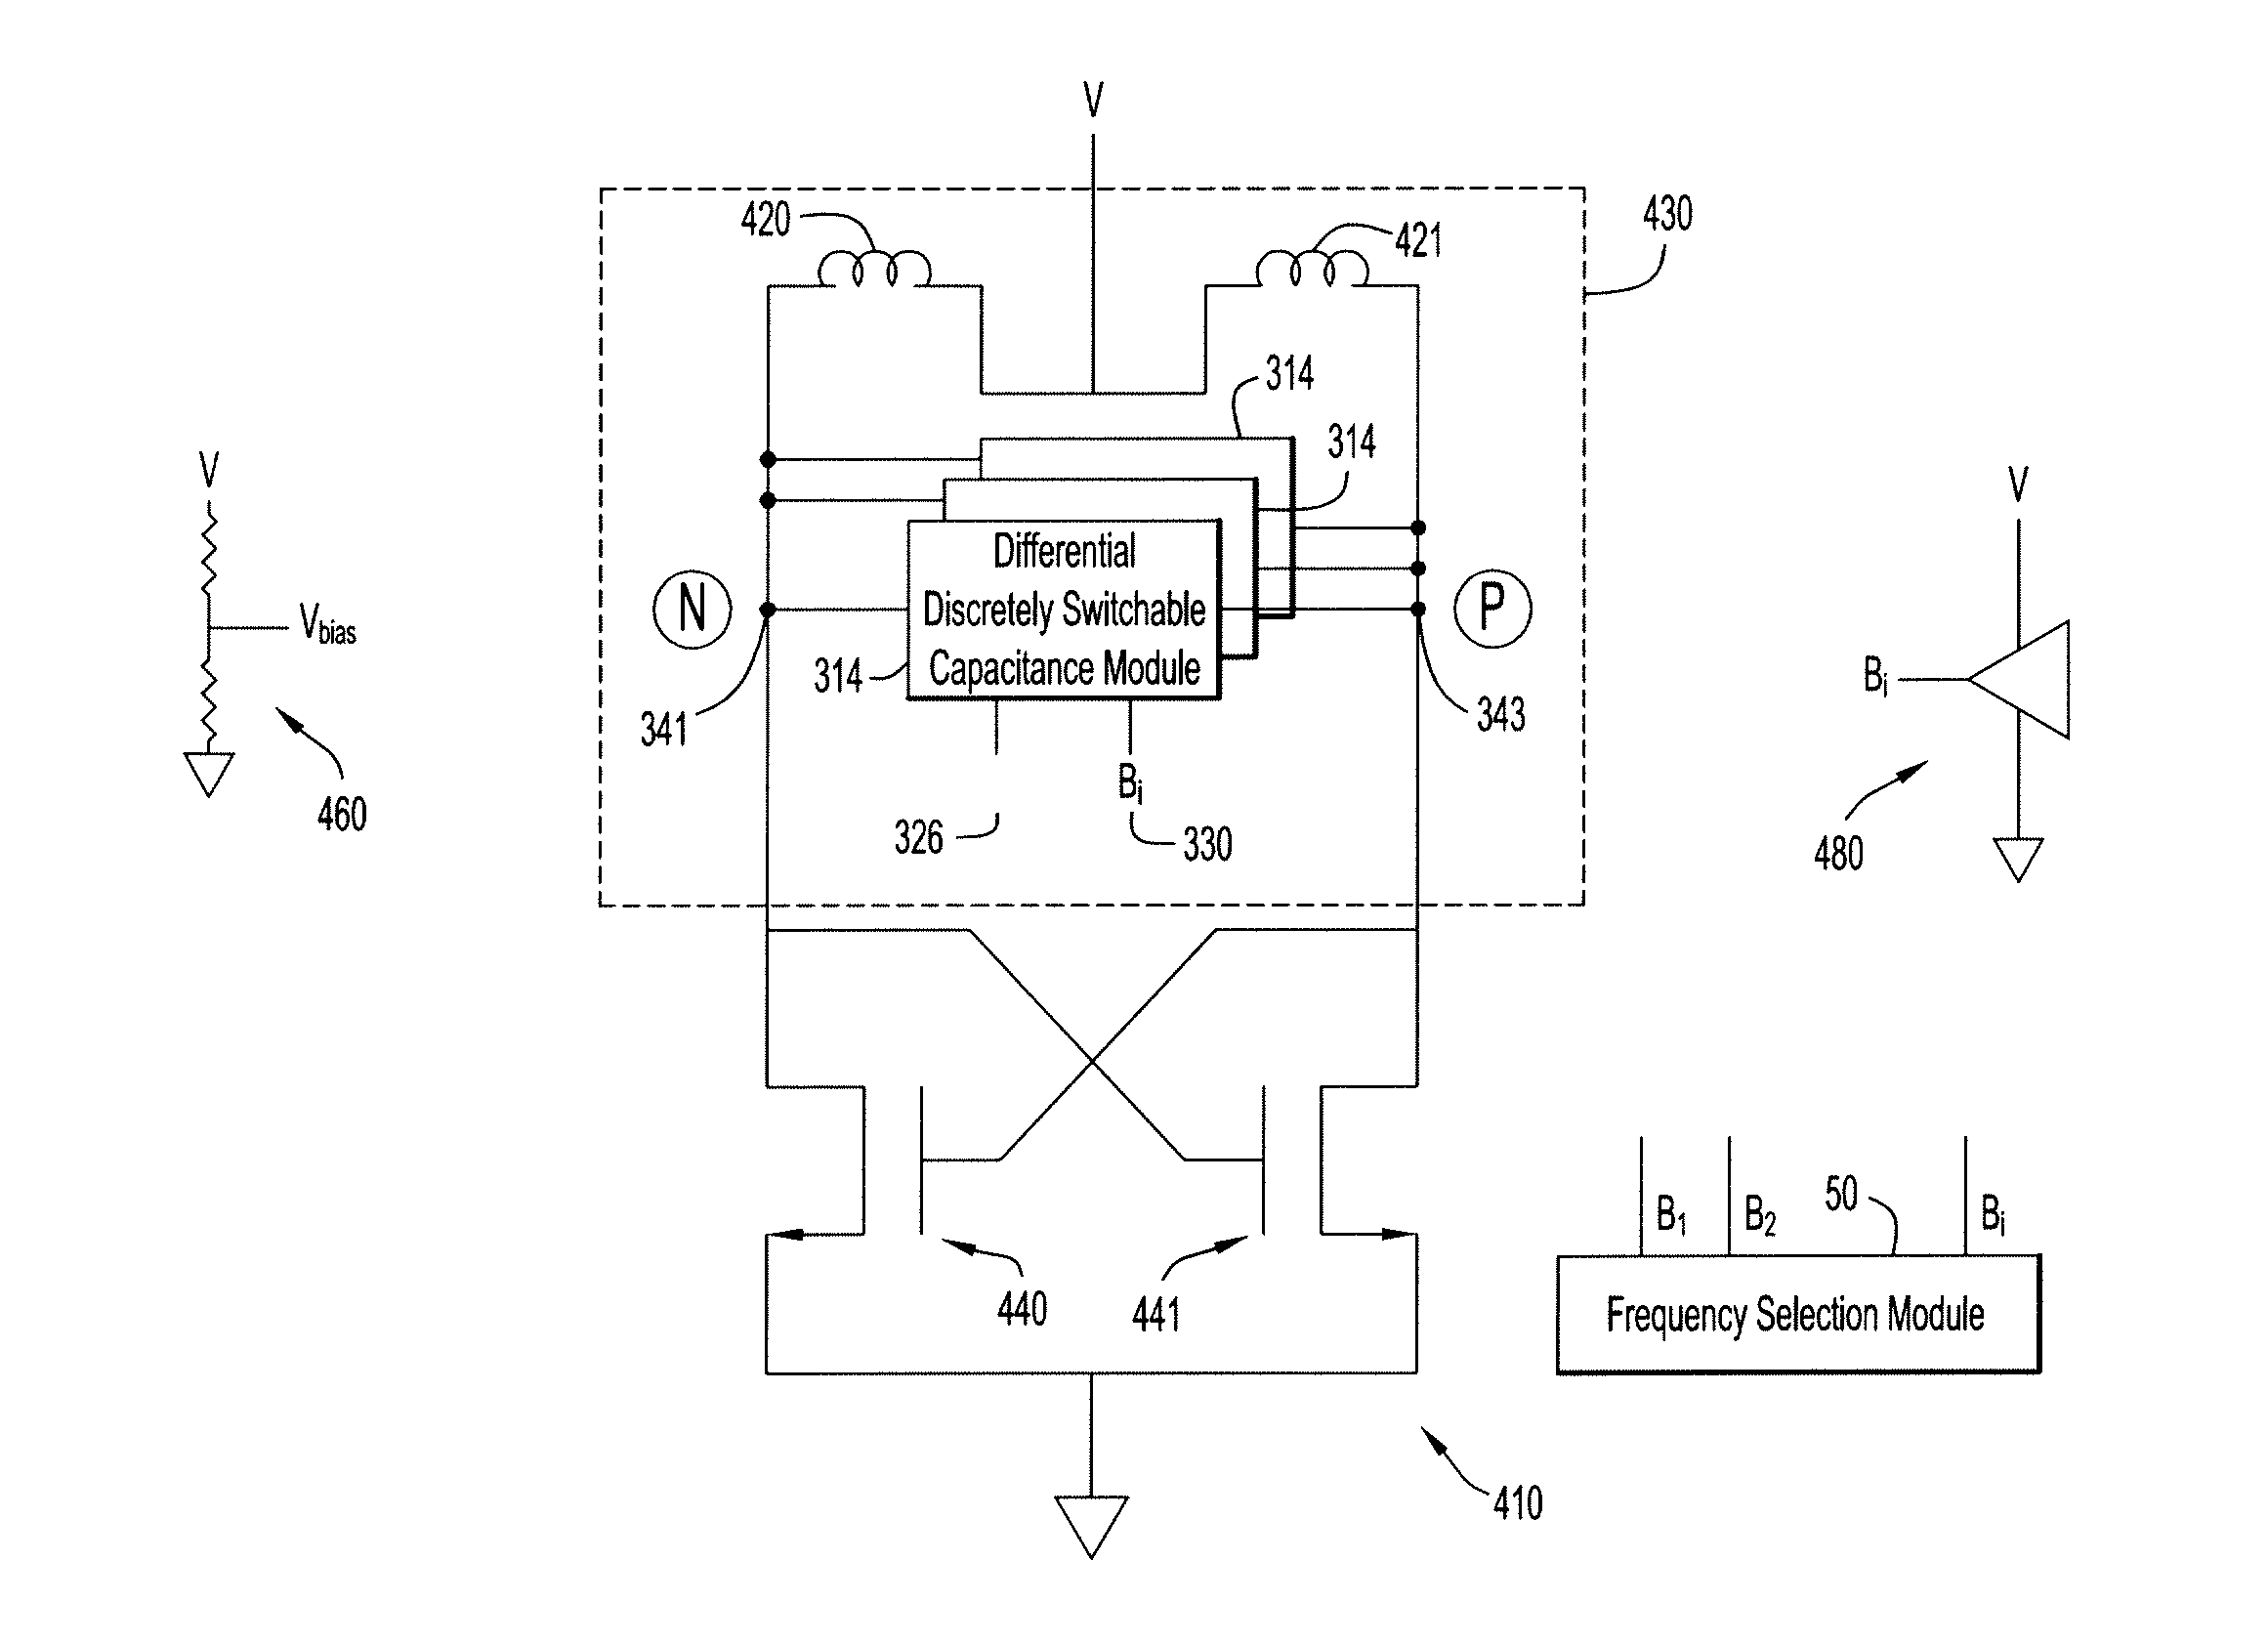 Apparatus and Method for Digitally Controlling Capacitance